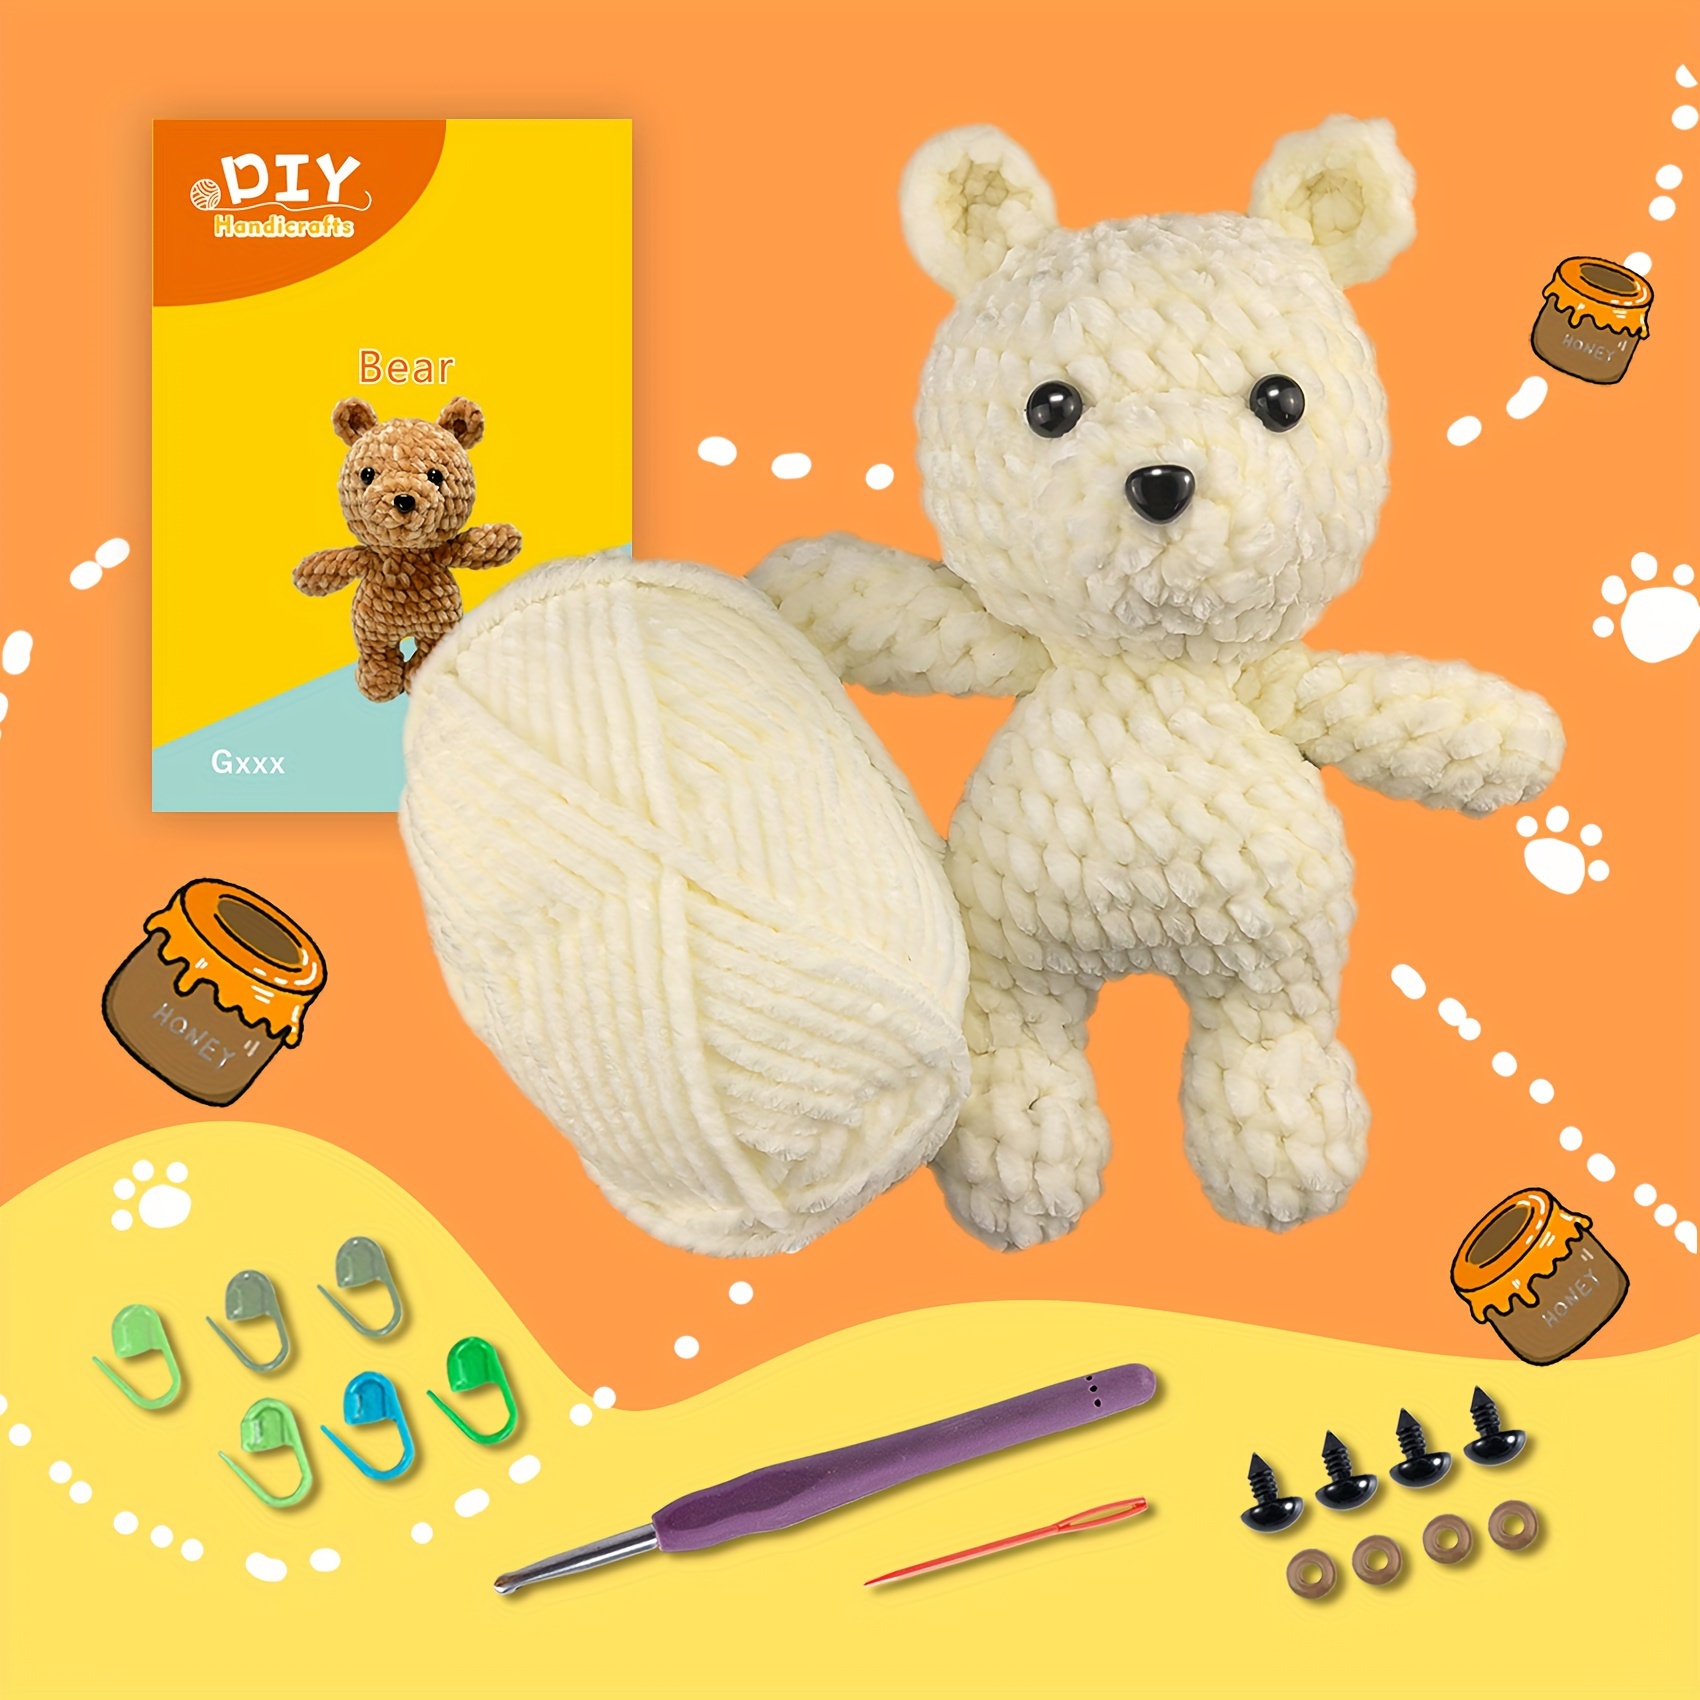 DIY Red Fox Crochet Kit With Step-By-Step Video Tutorials For Beginners  Knitted Animal Kit With Crochet Hooks Doll Cute Animal Crocheting Knitting  Kit As Creative Gift For Festival And Birthday Party Supplies